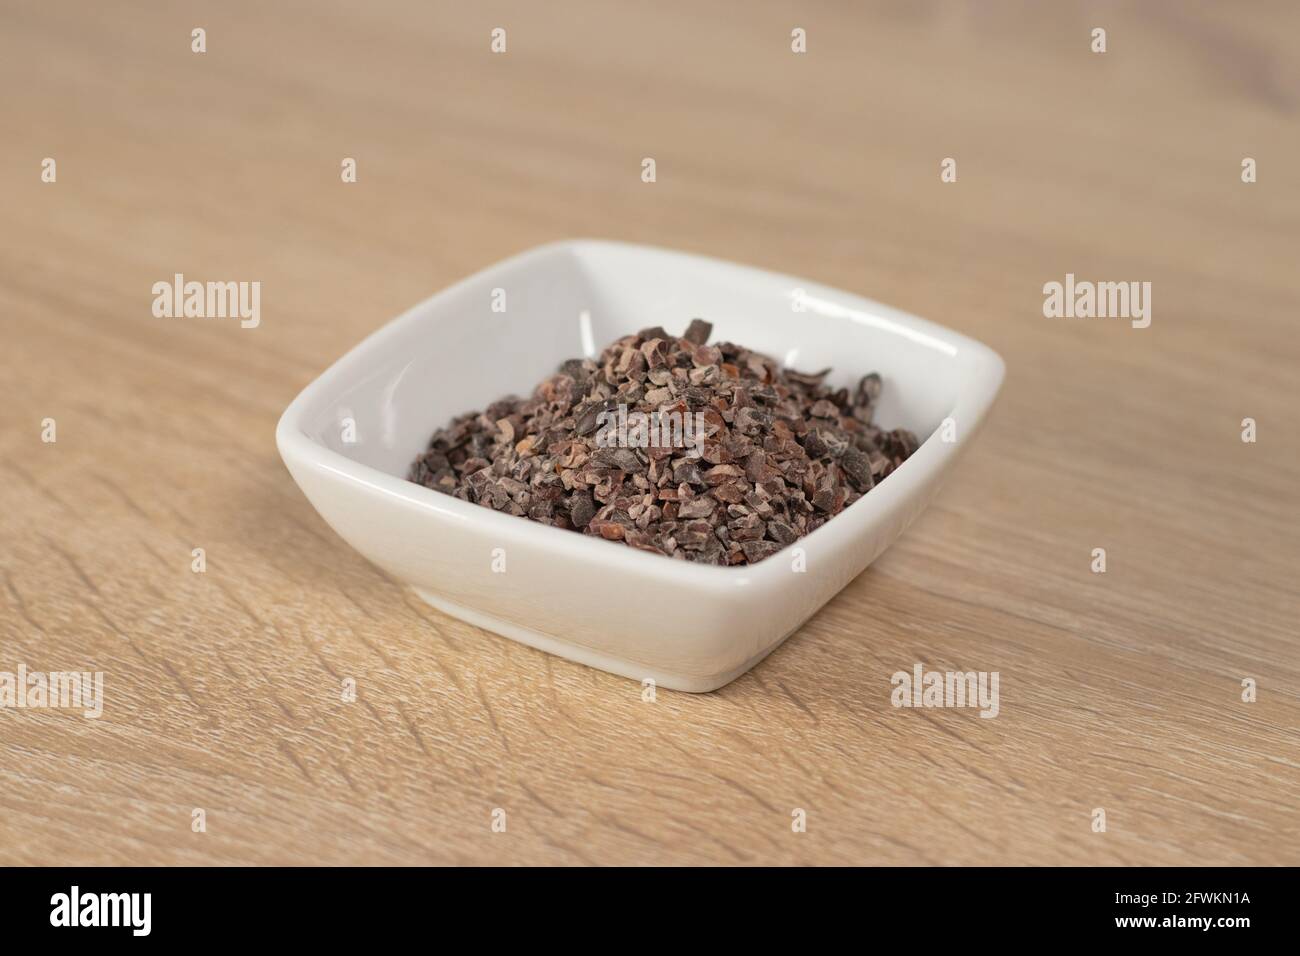 Roasted ground cacao bean on a white square bowl. Cacao Nibs. Stock Photo